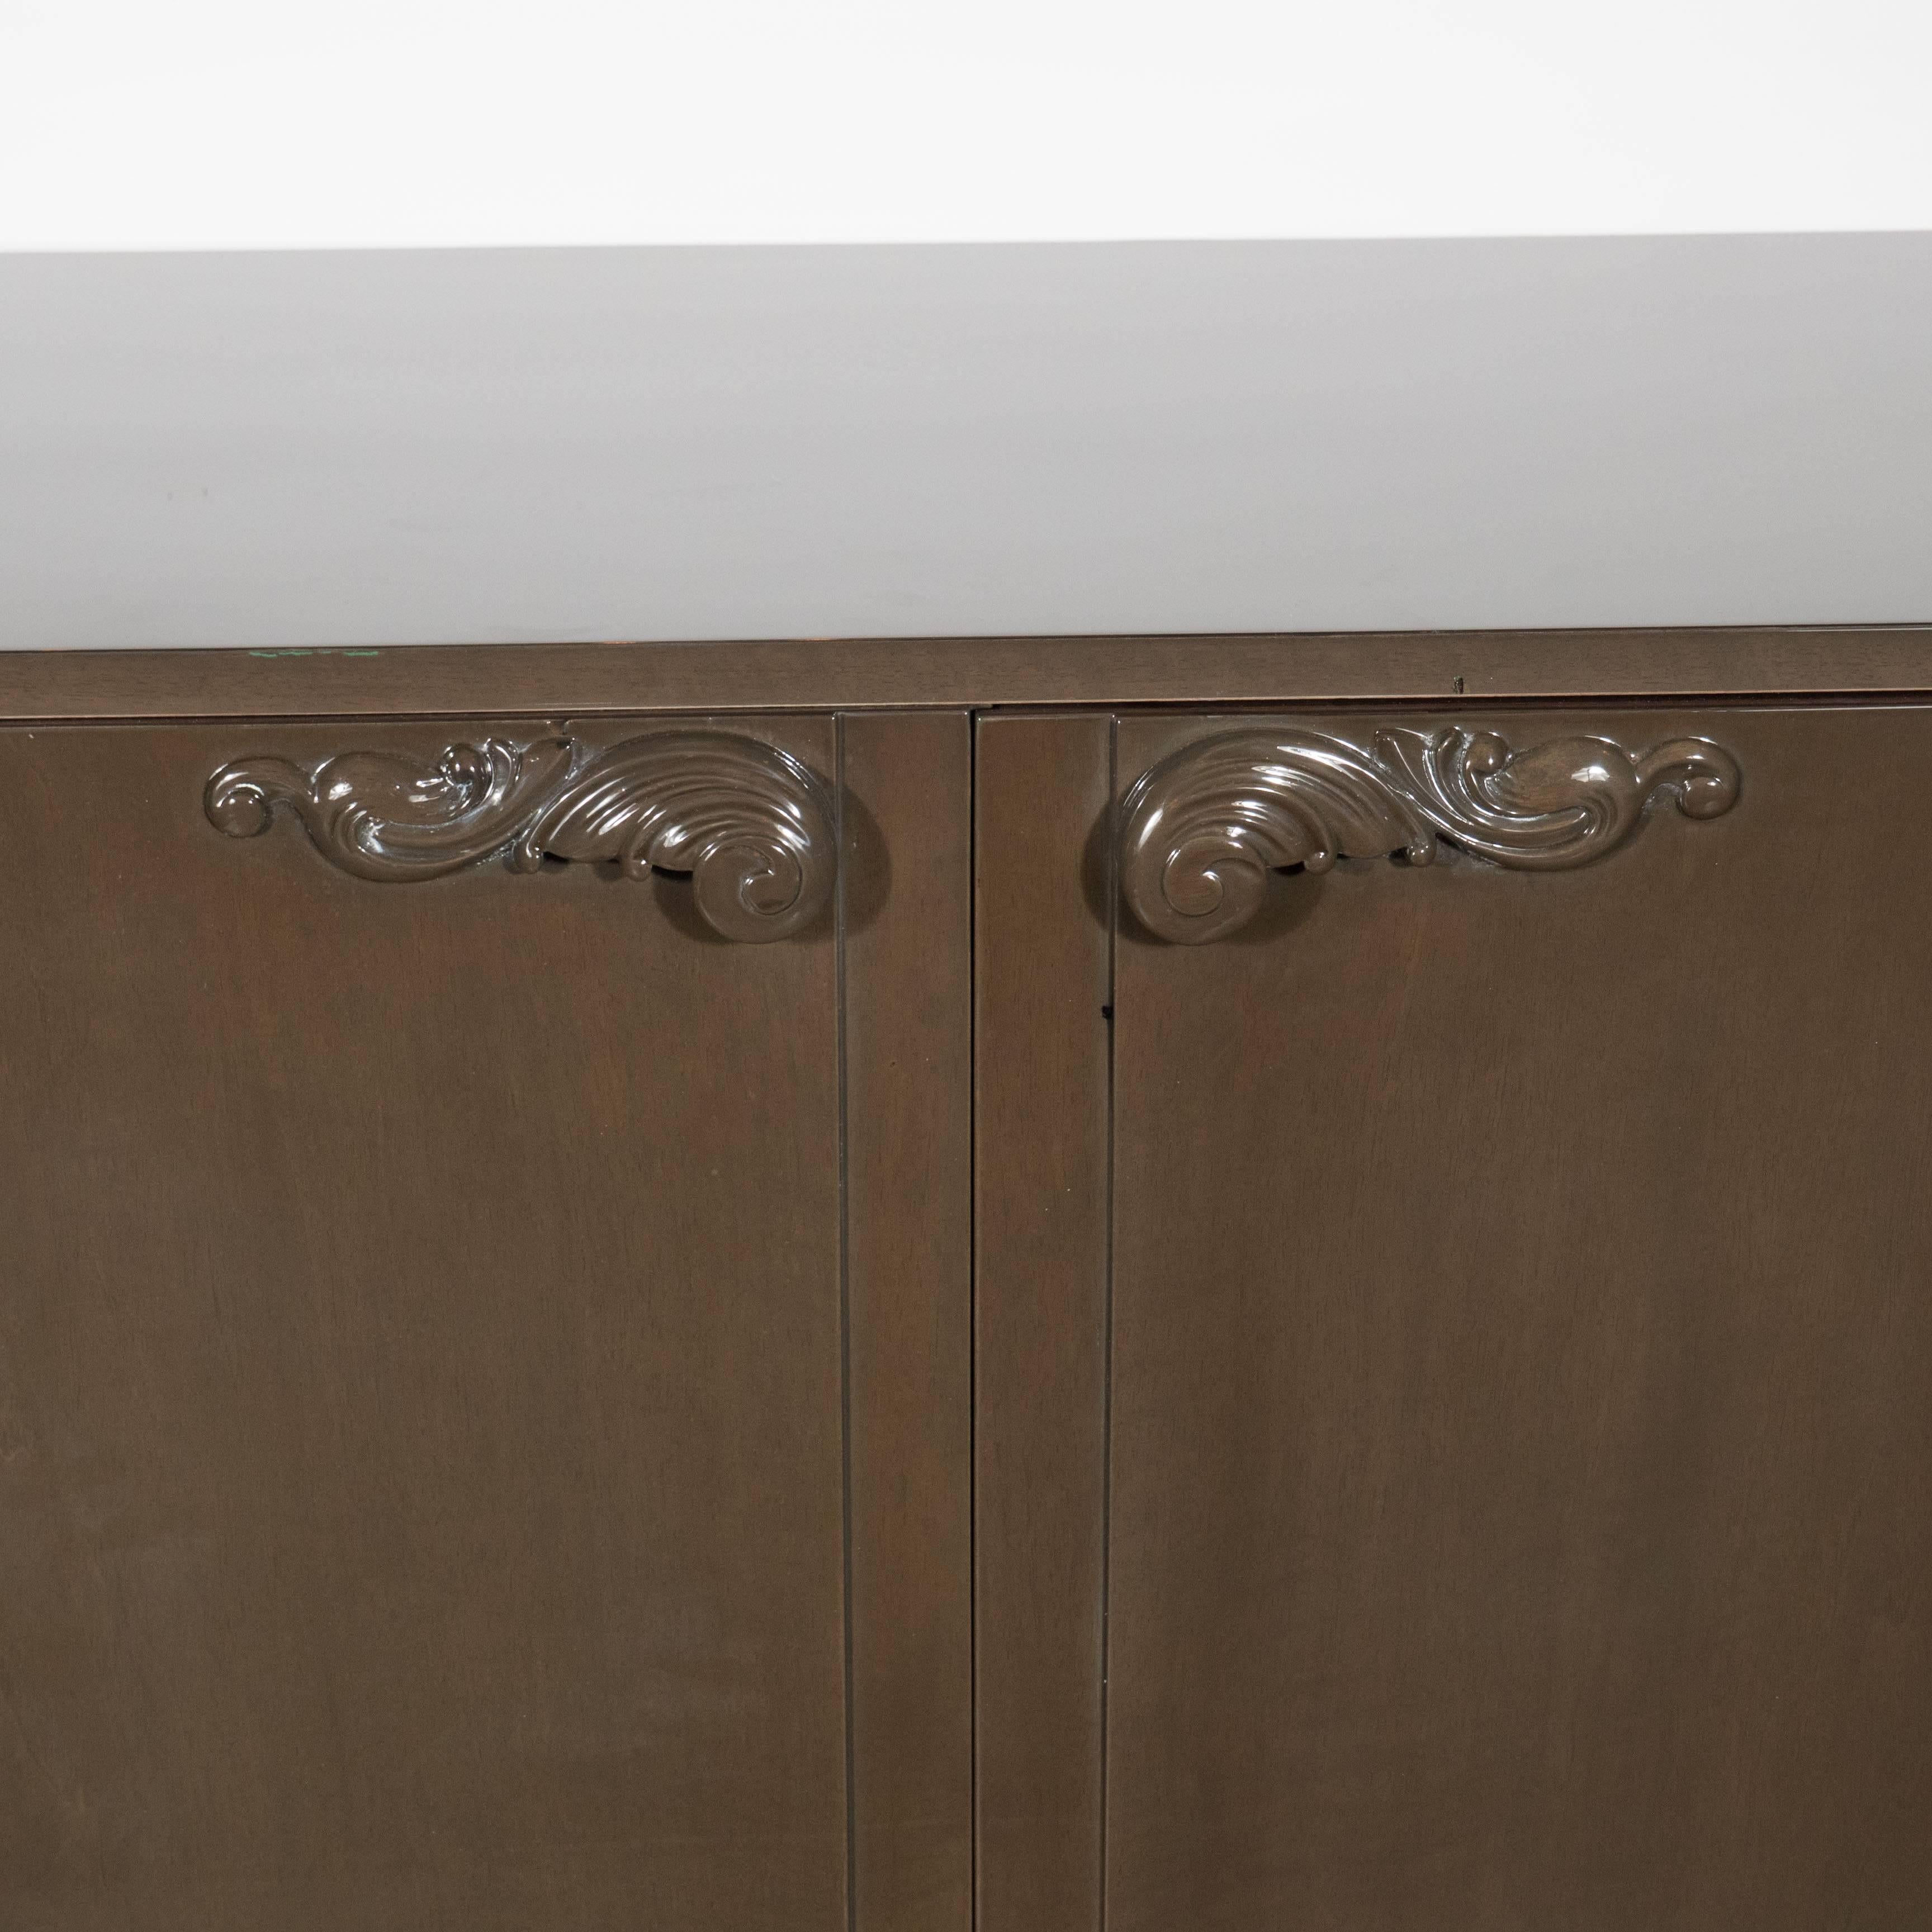 1940s Hollywood sideboard by Lorin Jackson for Grosfeld House features a grey glazed finish on bleached mahogany with scroll form pulls. A clean design that would work well will all types of decor. The interior is mahogany and features four large